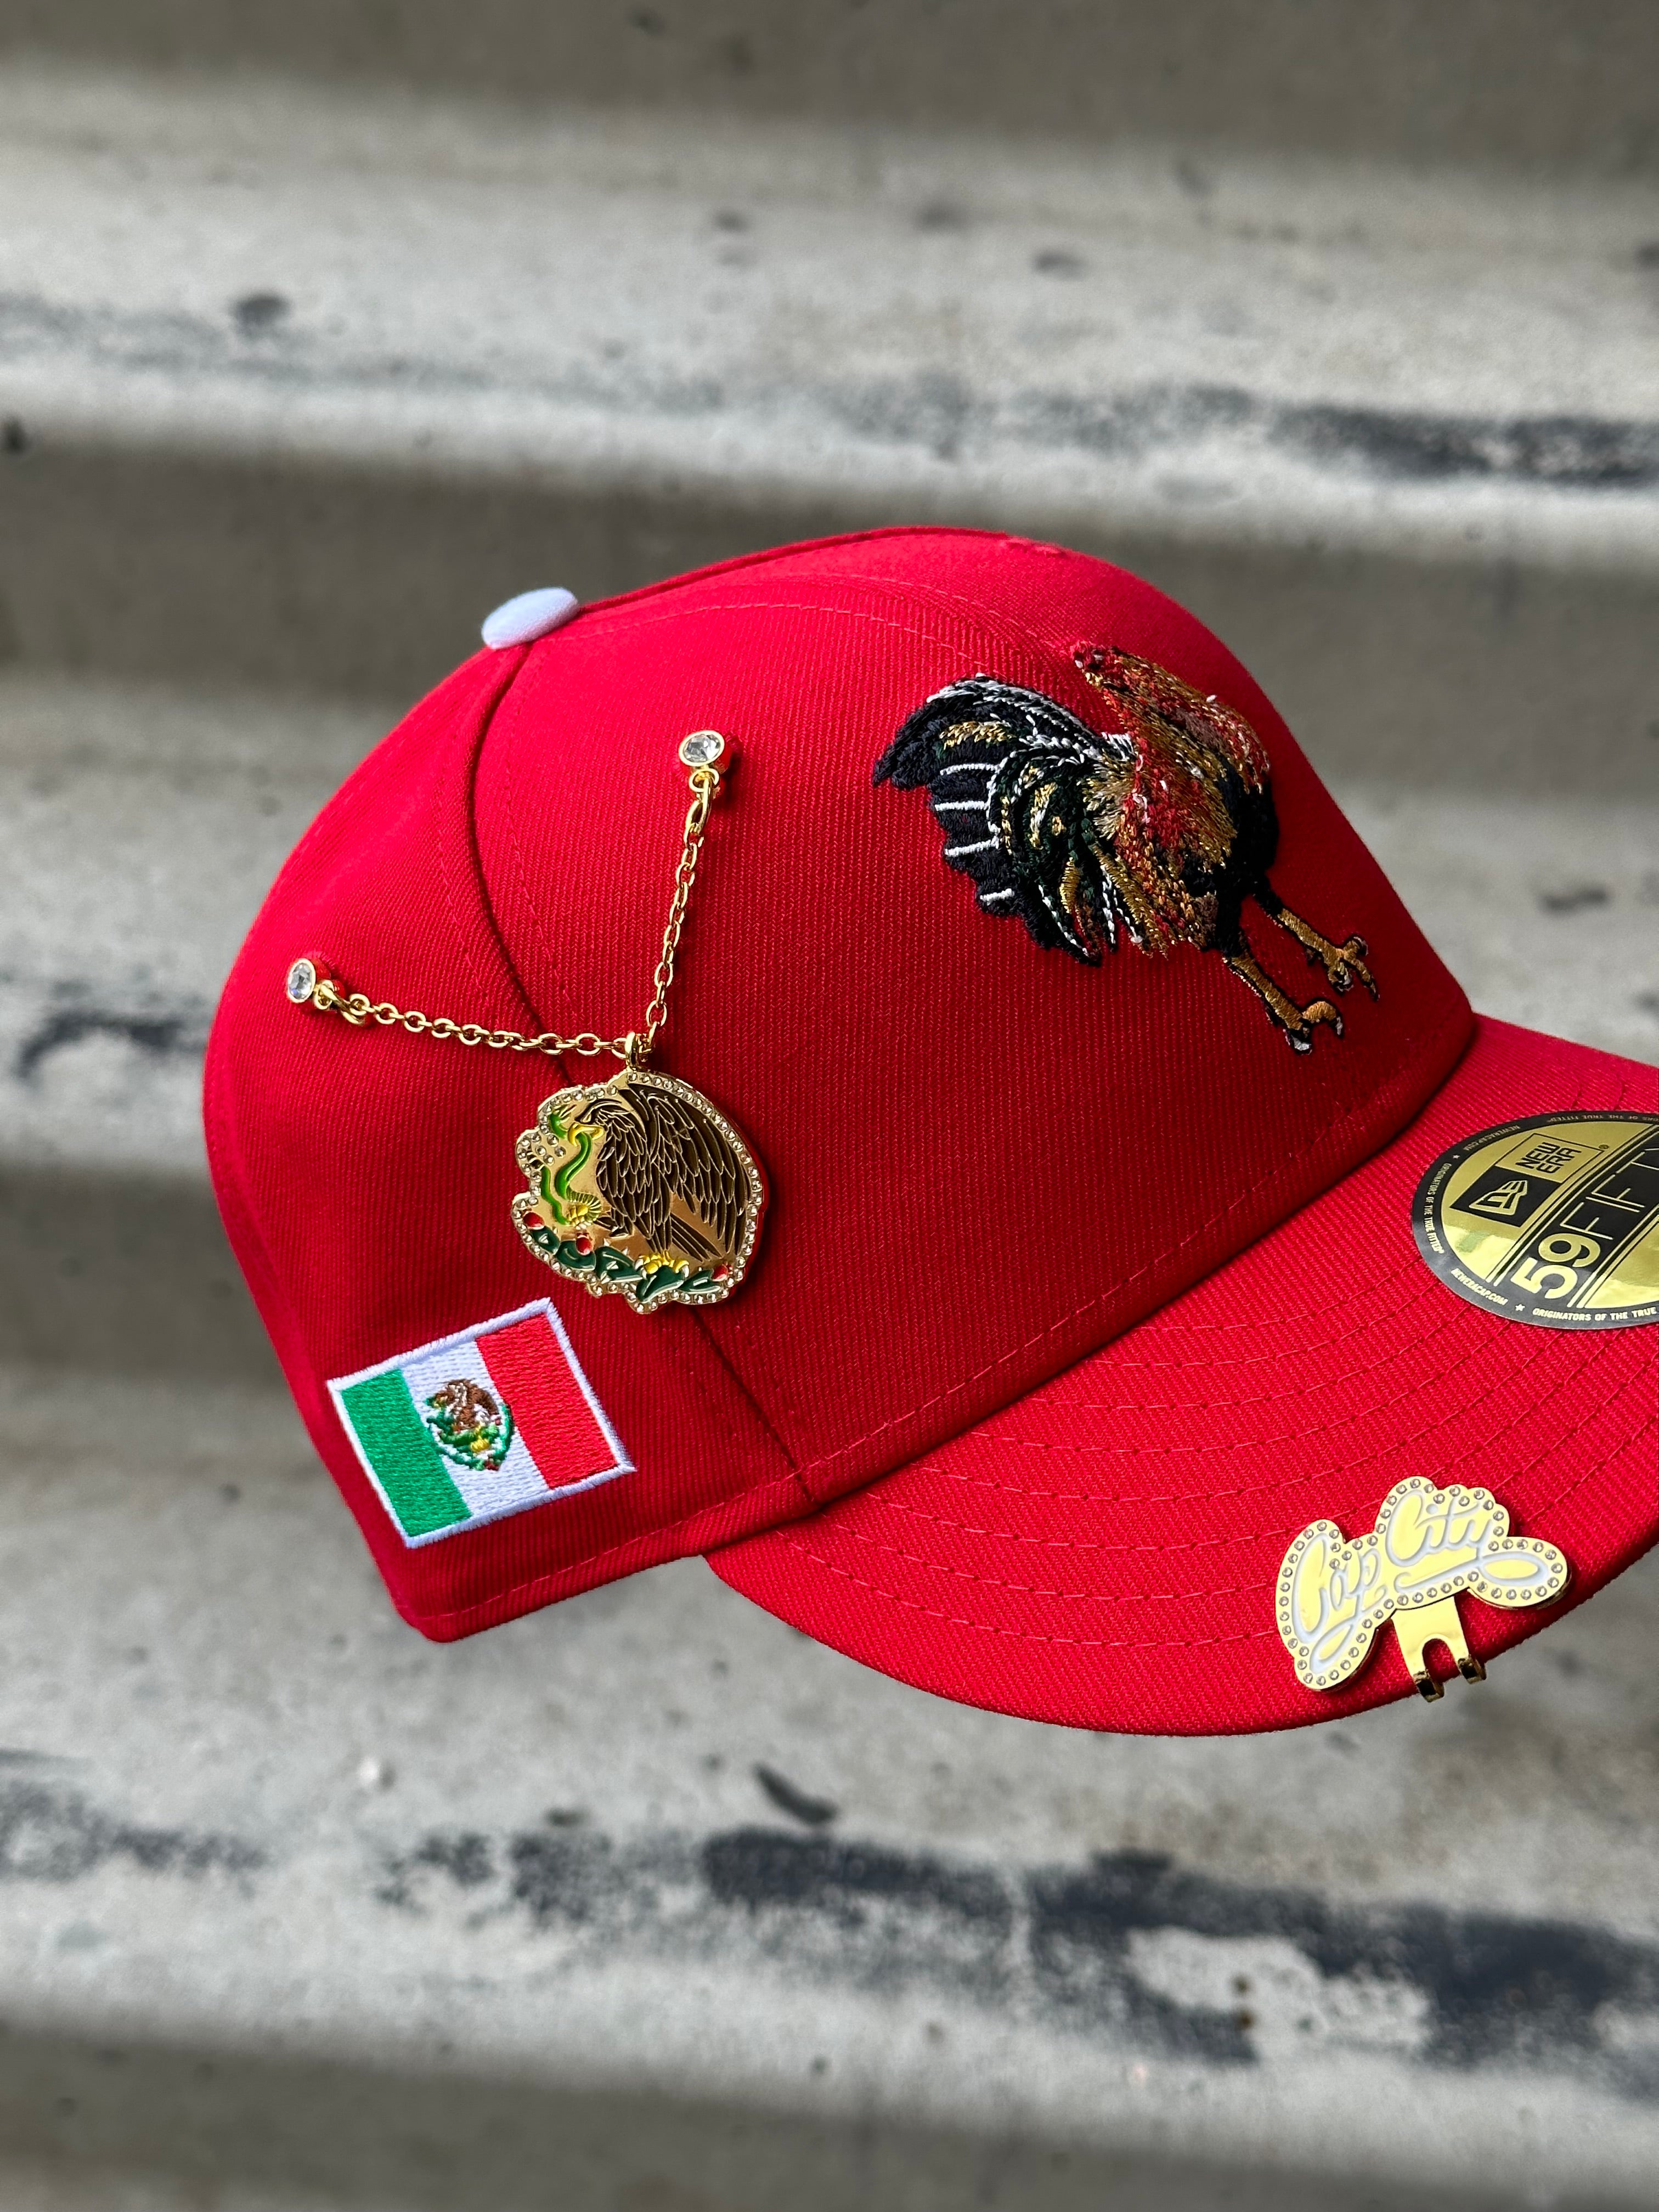 NEW ERA EXCLUSIVE 59FIFTY RED MEXICO "EL GALLO" W/ MEXICO FLAG PATCH